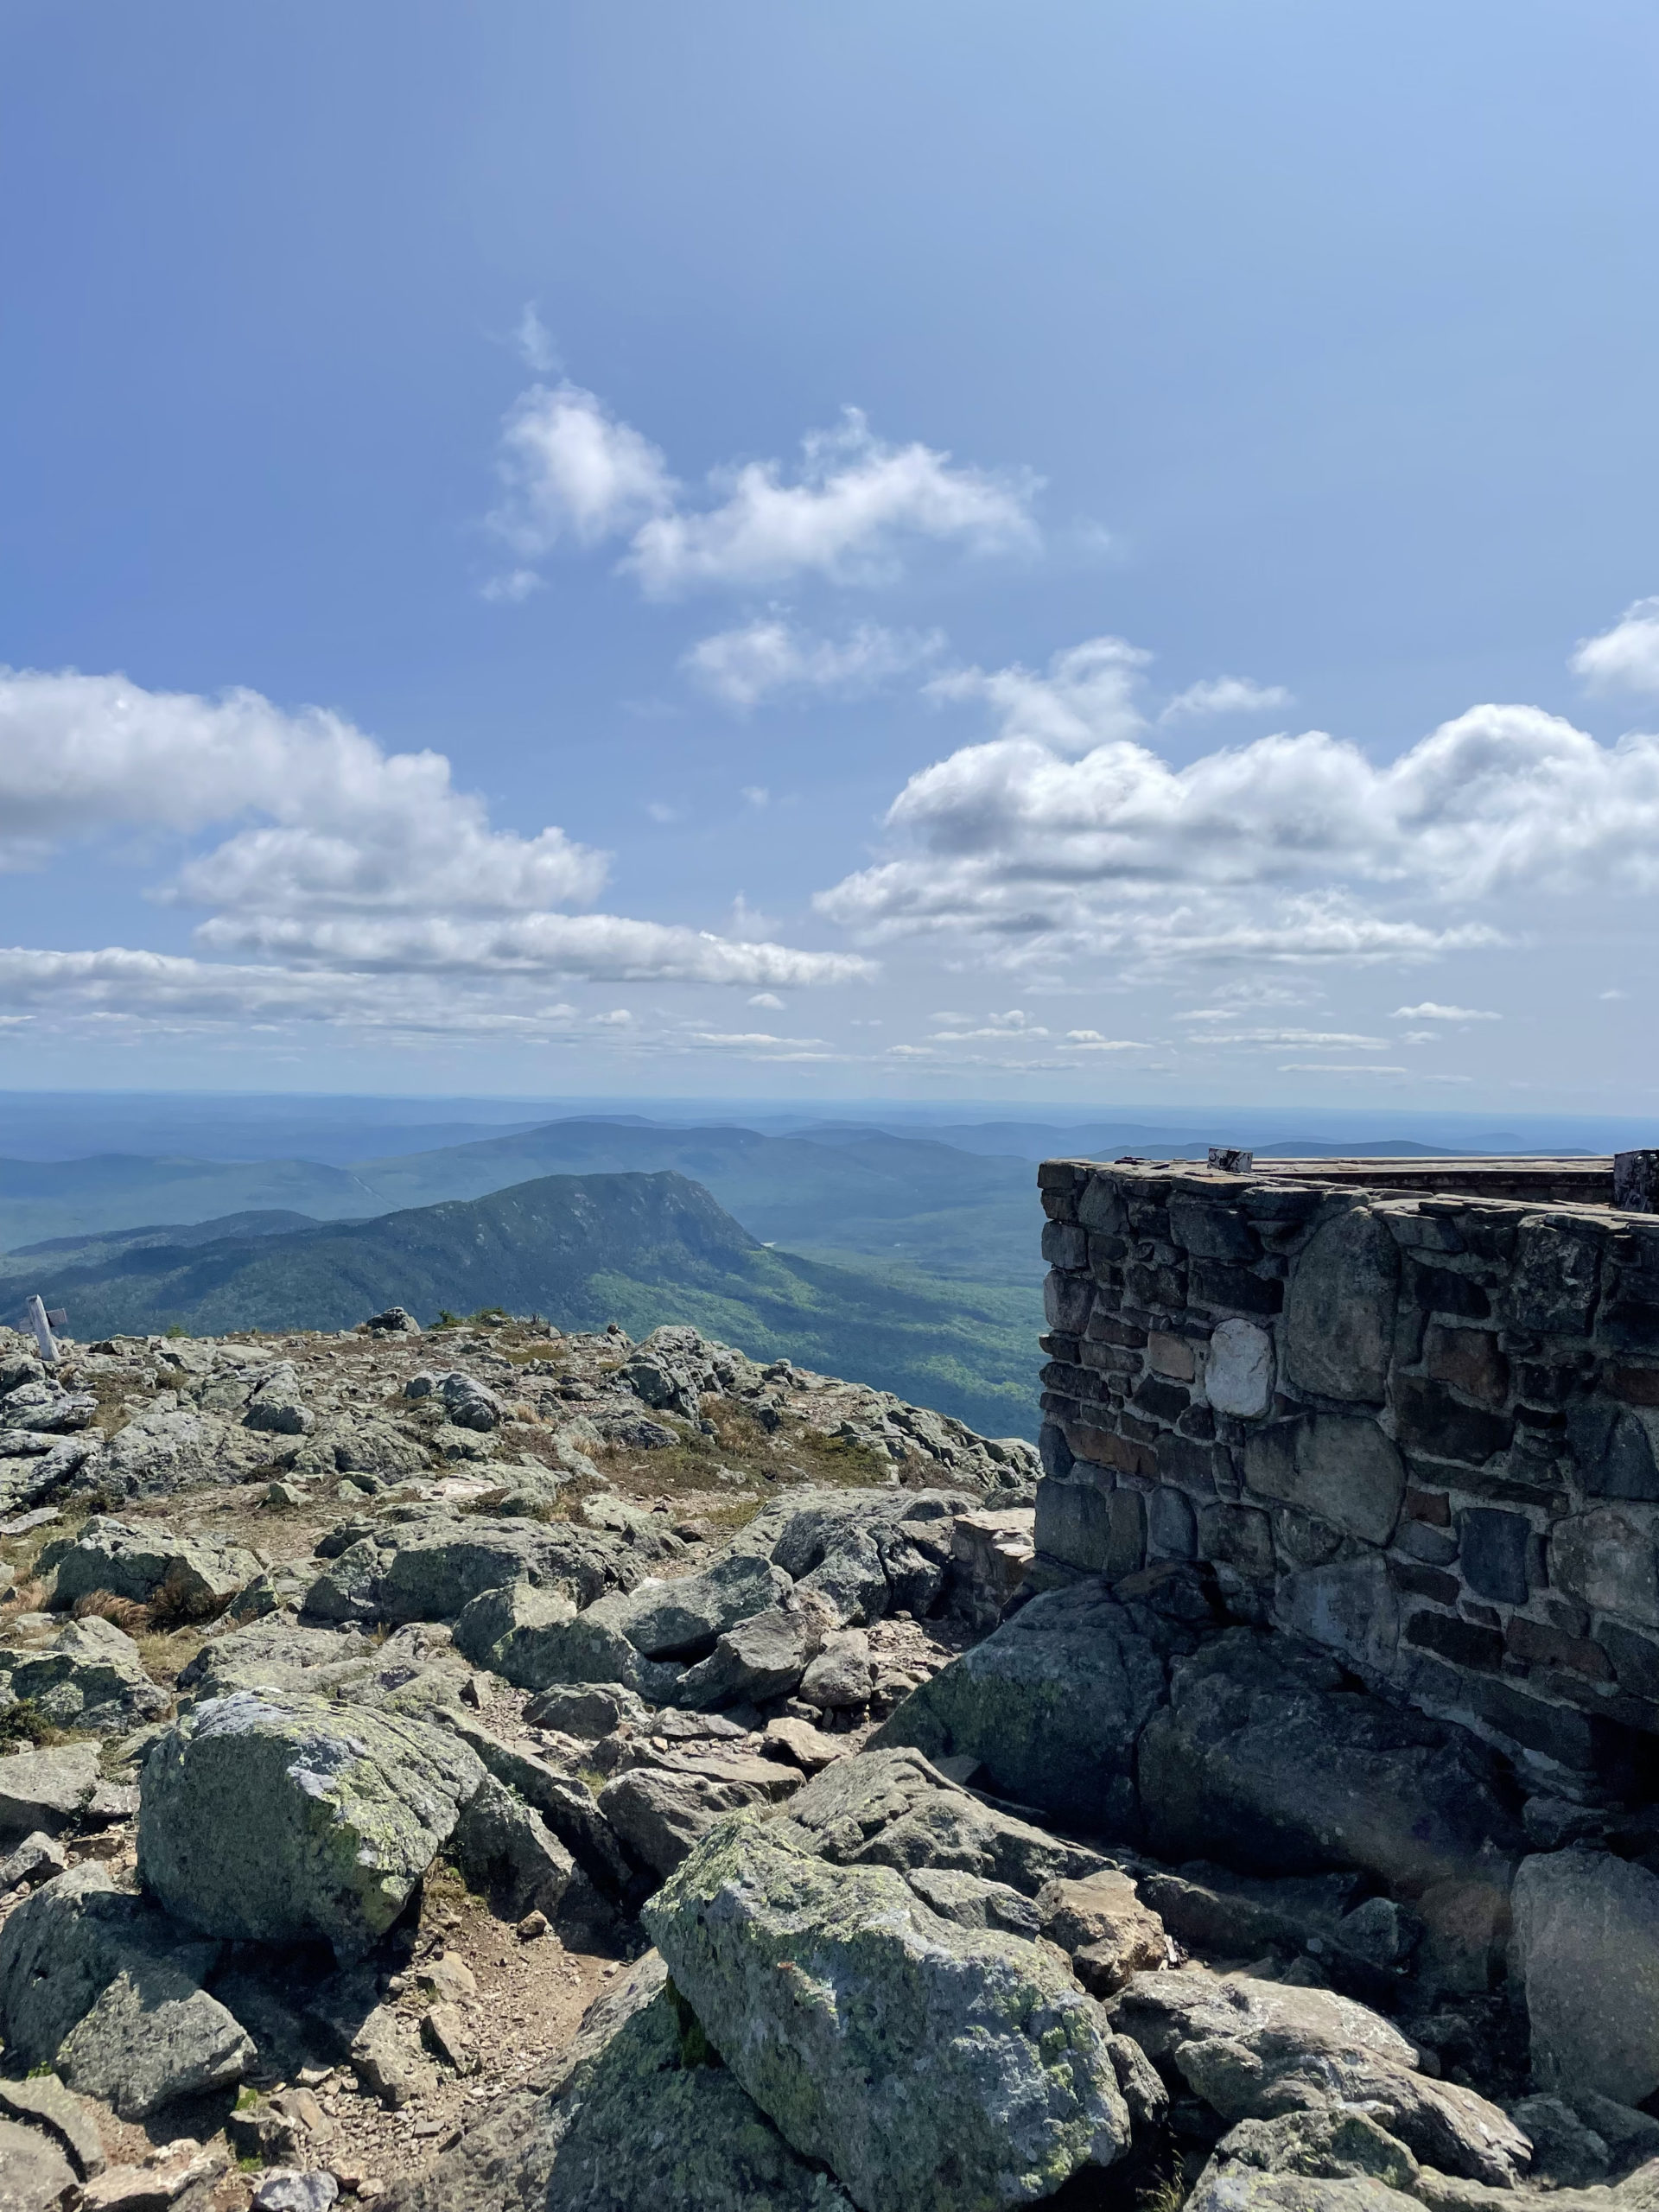 Fire tower foundation, seen while hiking Bigelow Mountain in Western Maine